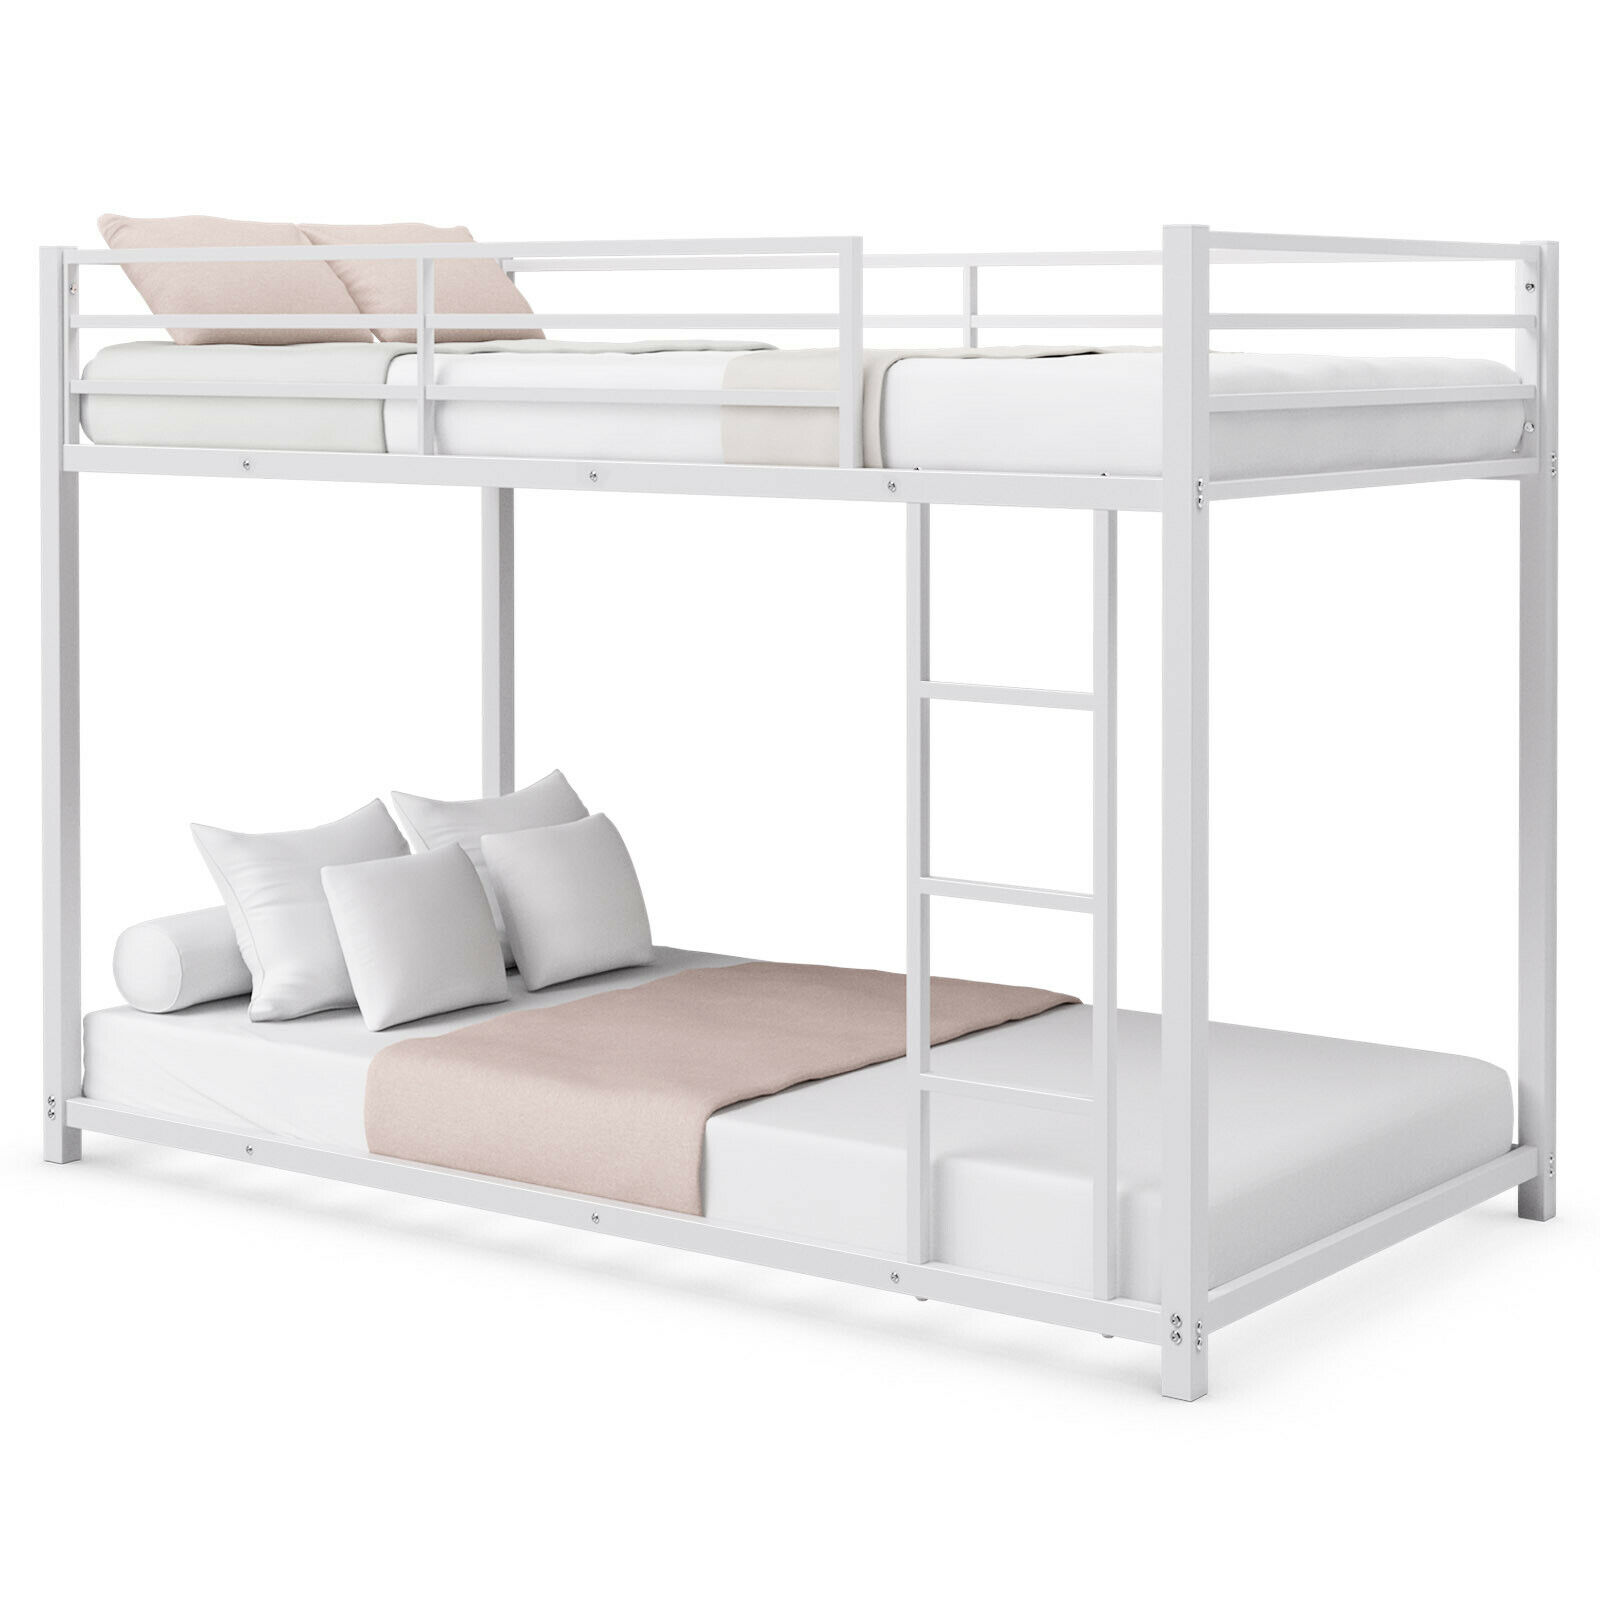 Giantex Twin Over Bunk Bed Frame, Sears Bunk Beds Full Over Bed